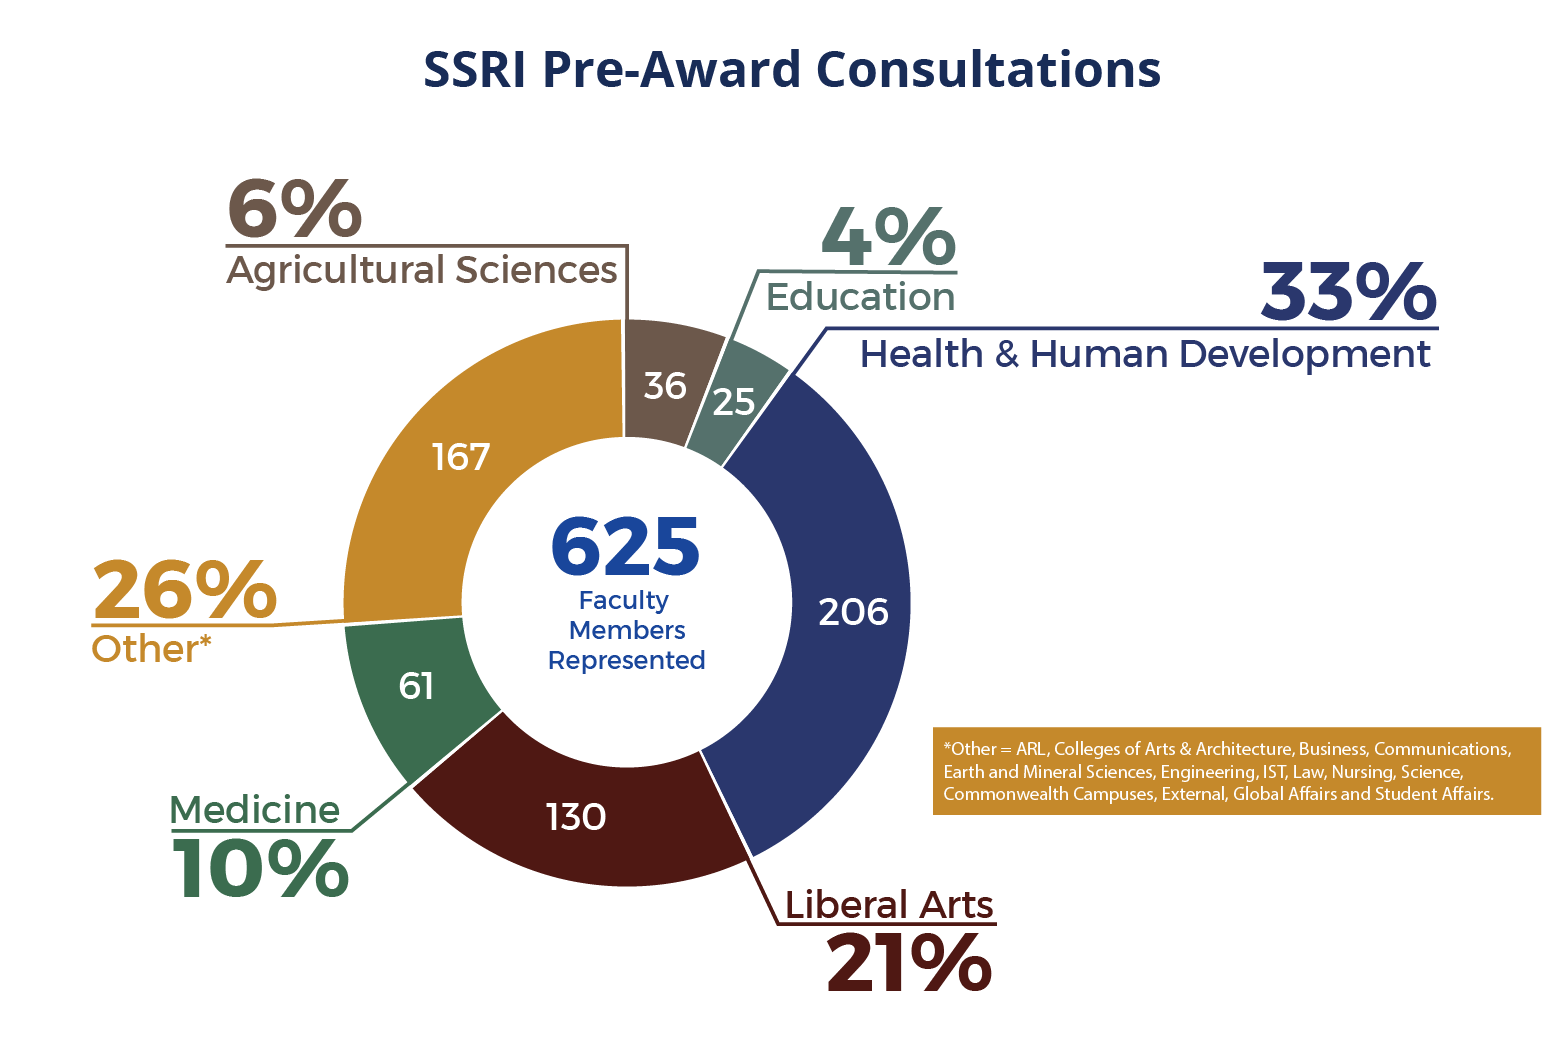 Pie chart of SSRI Pre-Award Consultations broken down by Department.